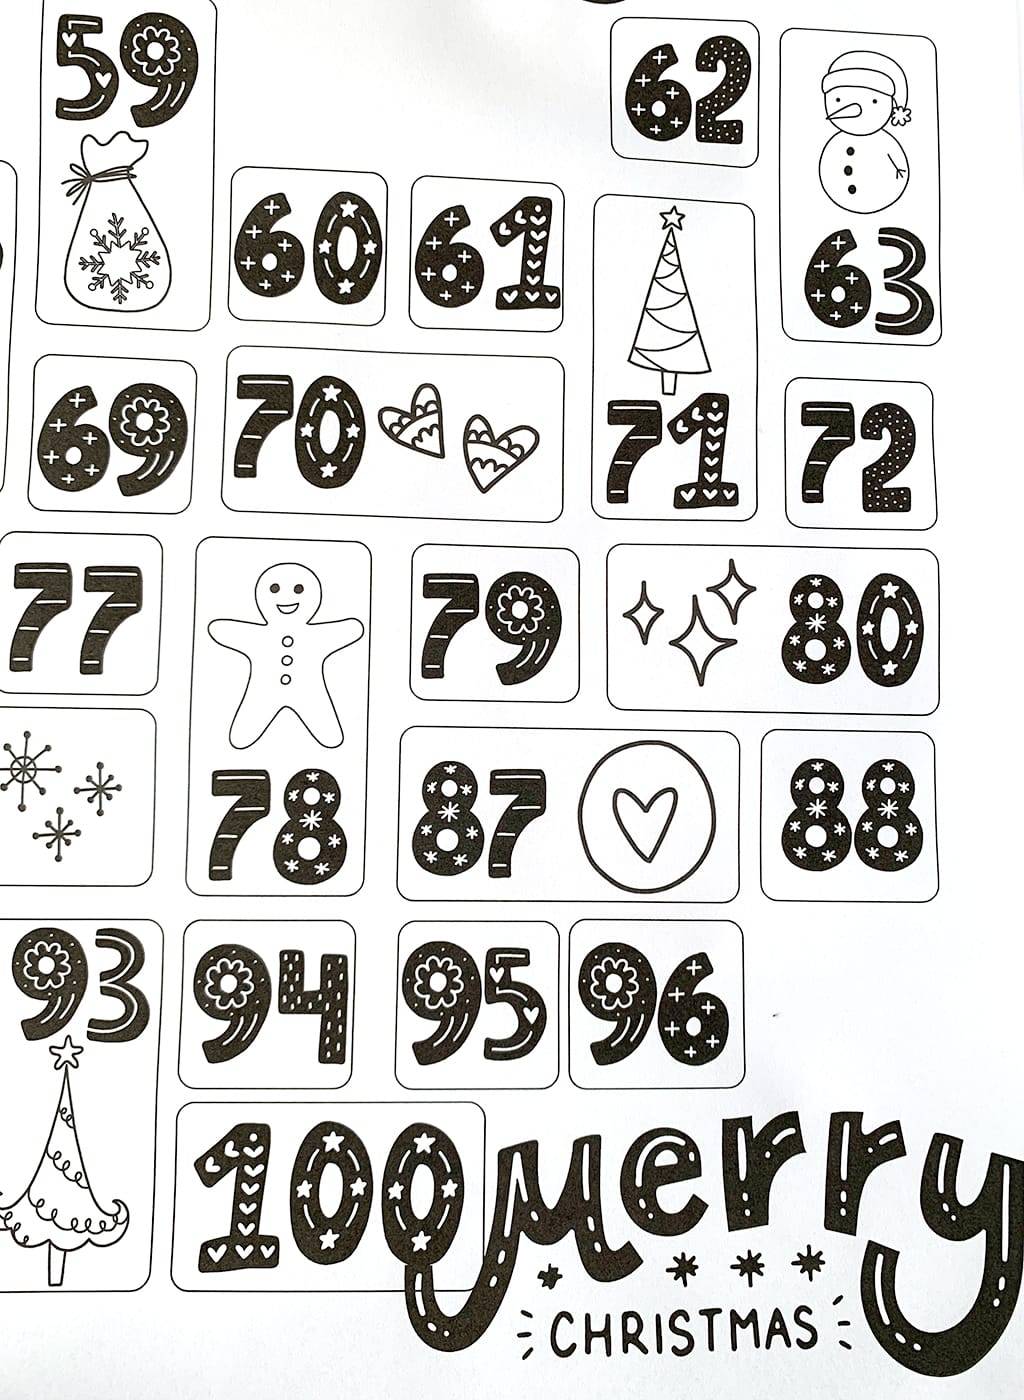 100 Acts of Kindness Coloring Countdown black and white image